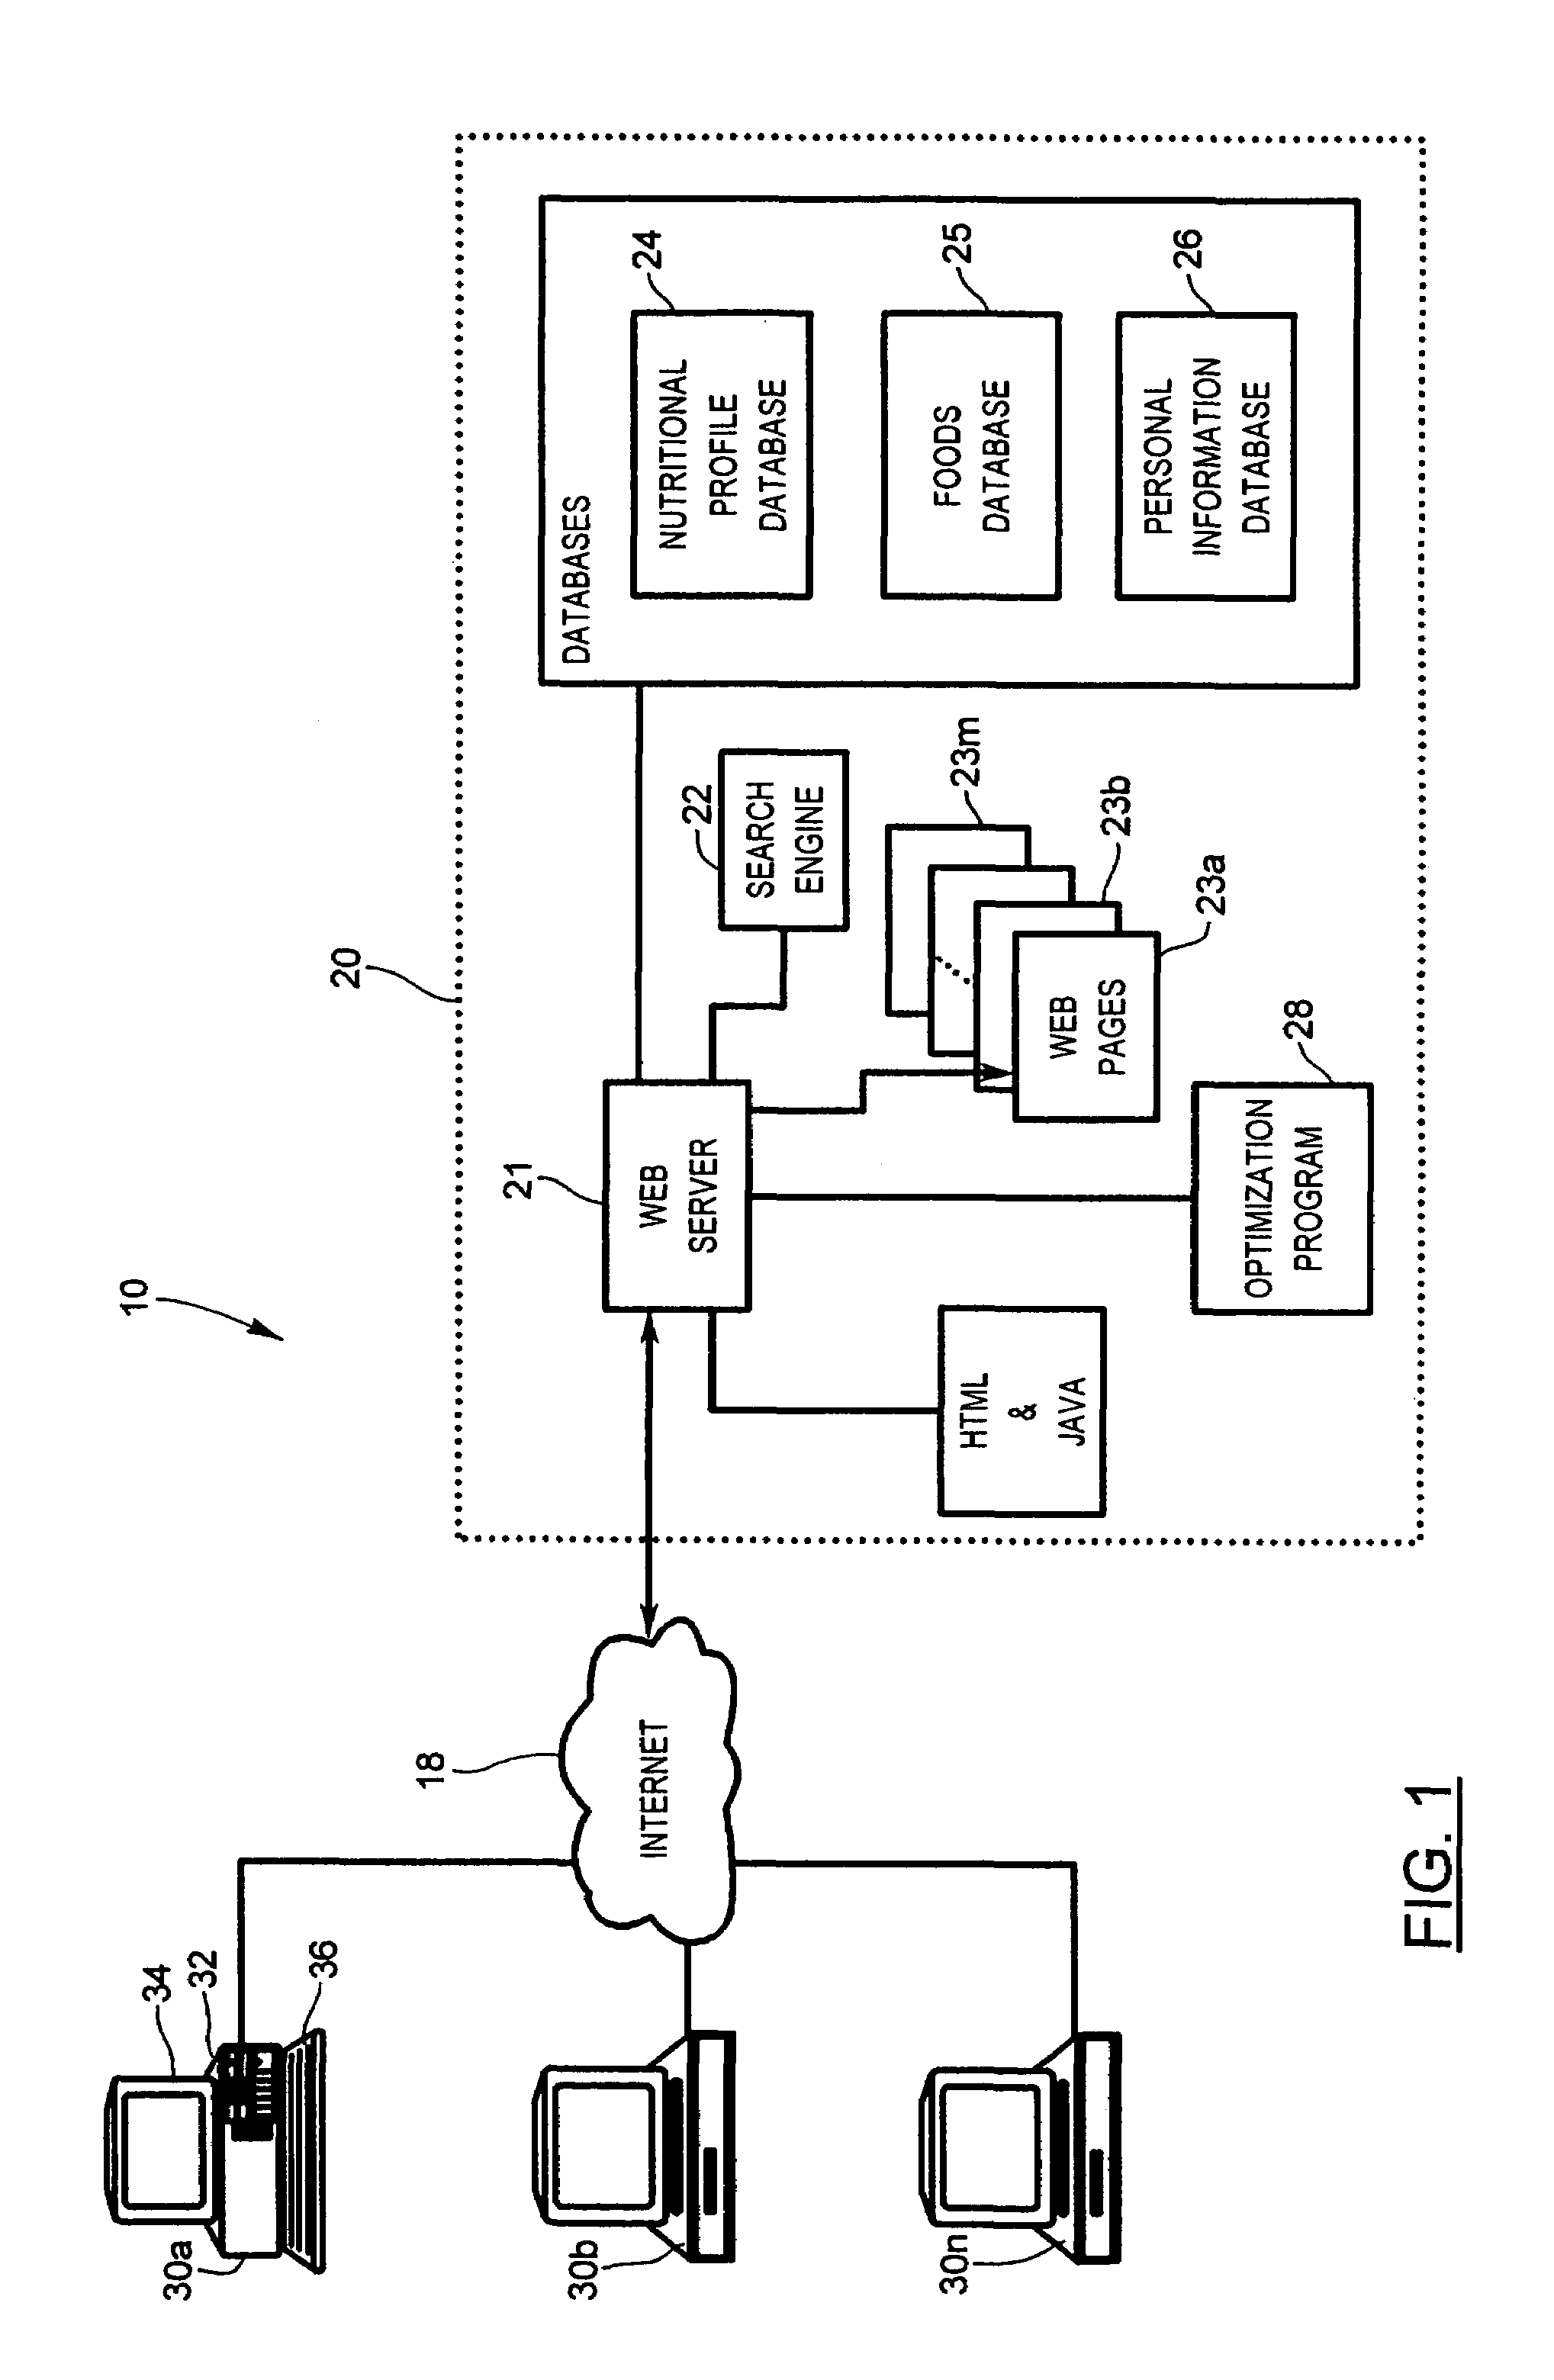 System and method for optimized dietary menu planning